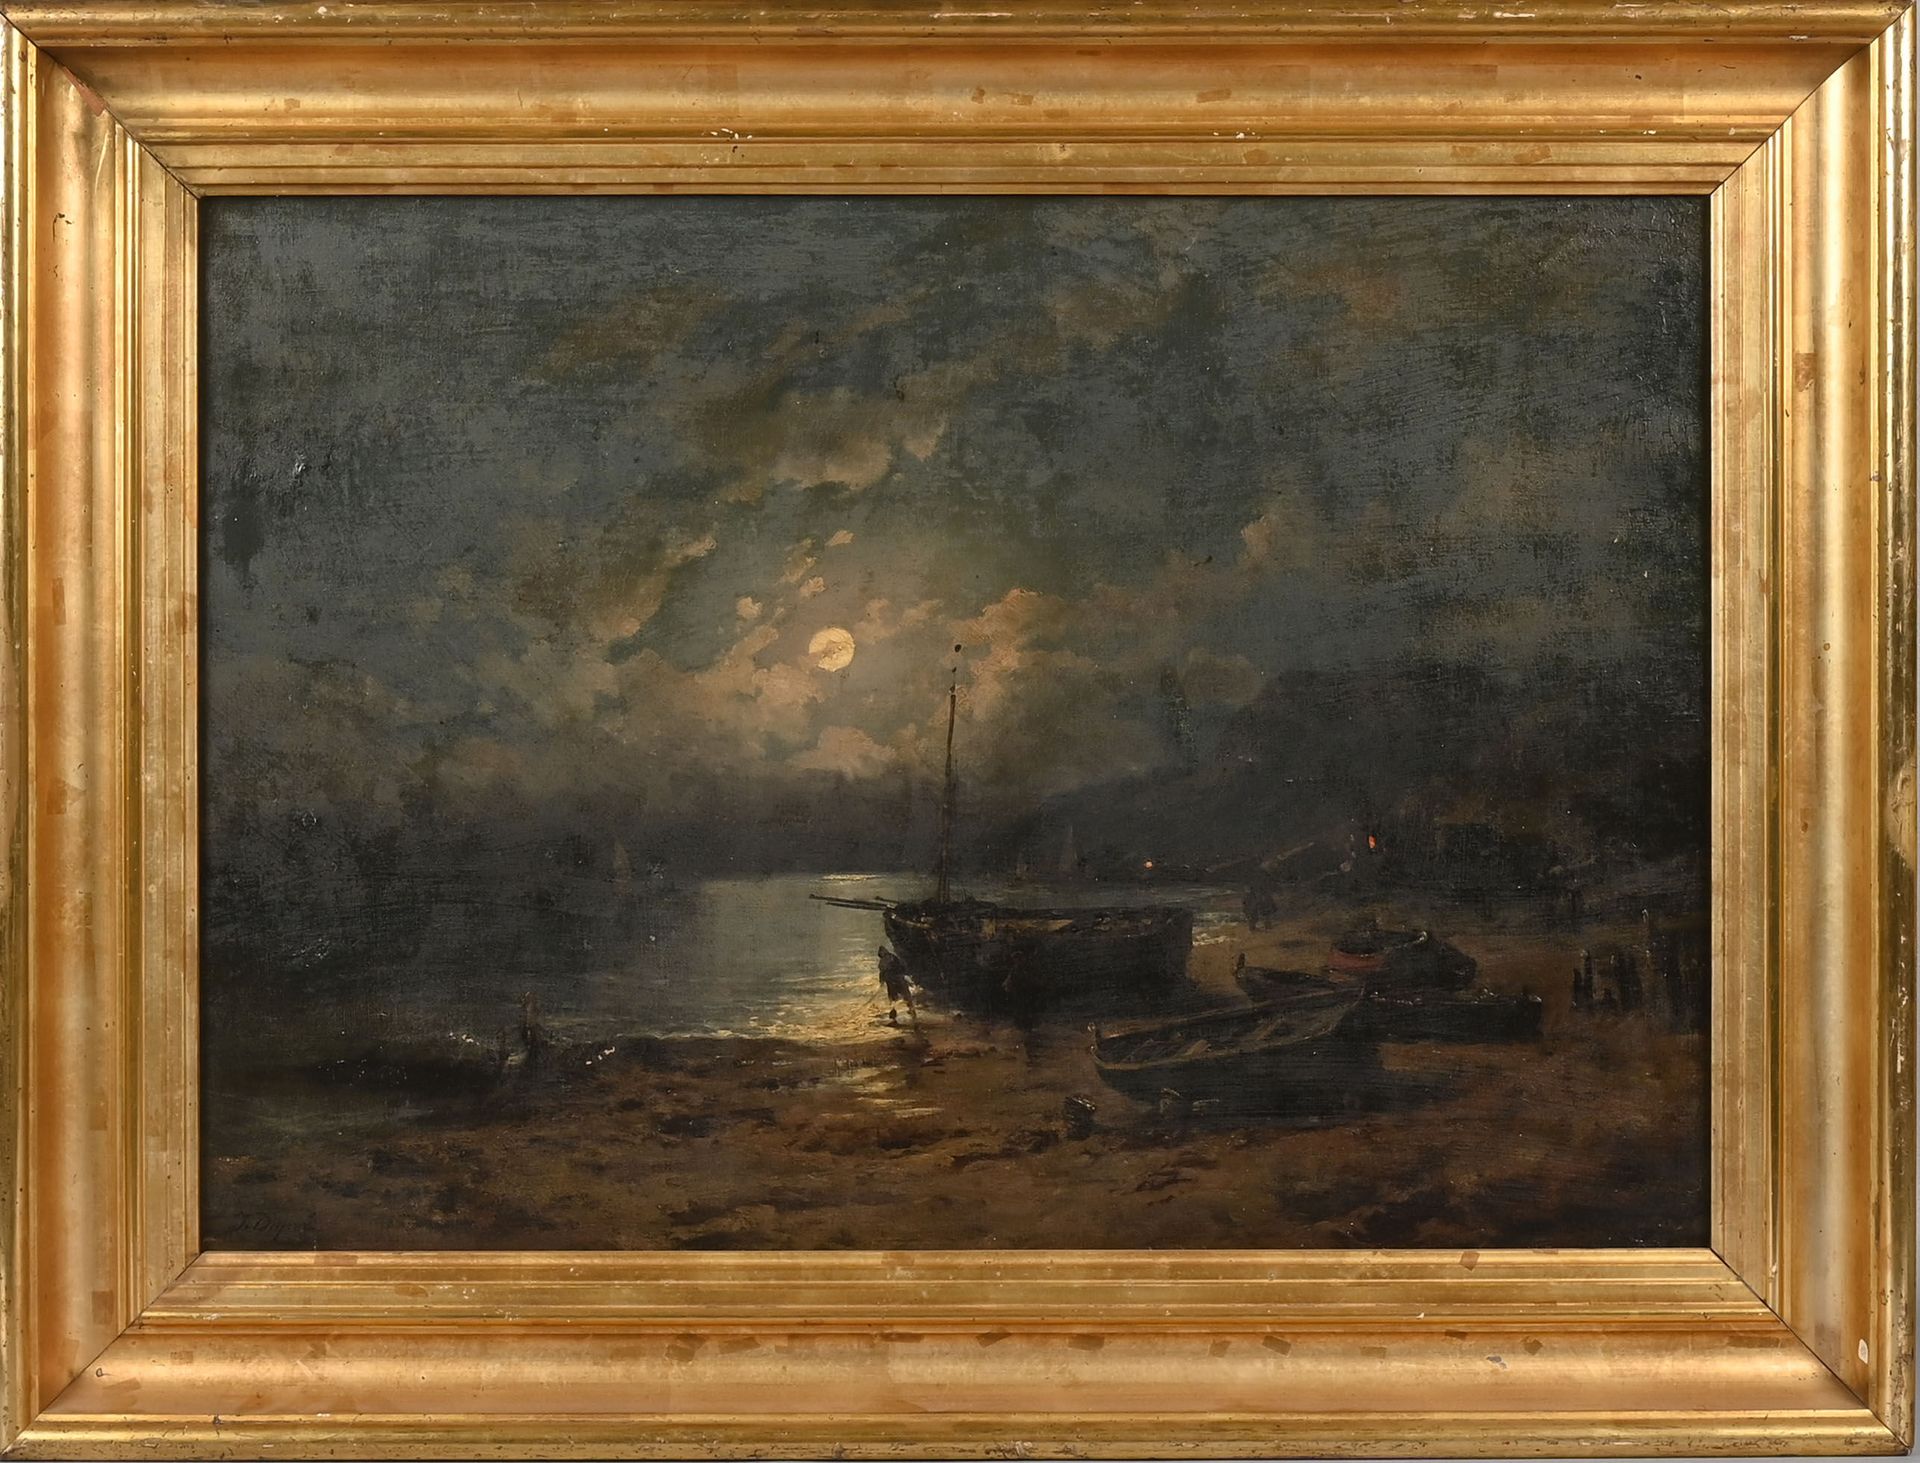 Null Jules DUPRÉ
(Nantes 1811 - L'Isle-Adam 1889)
Landscape with a boat in the m&hellip;